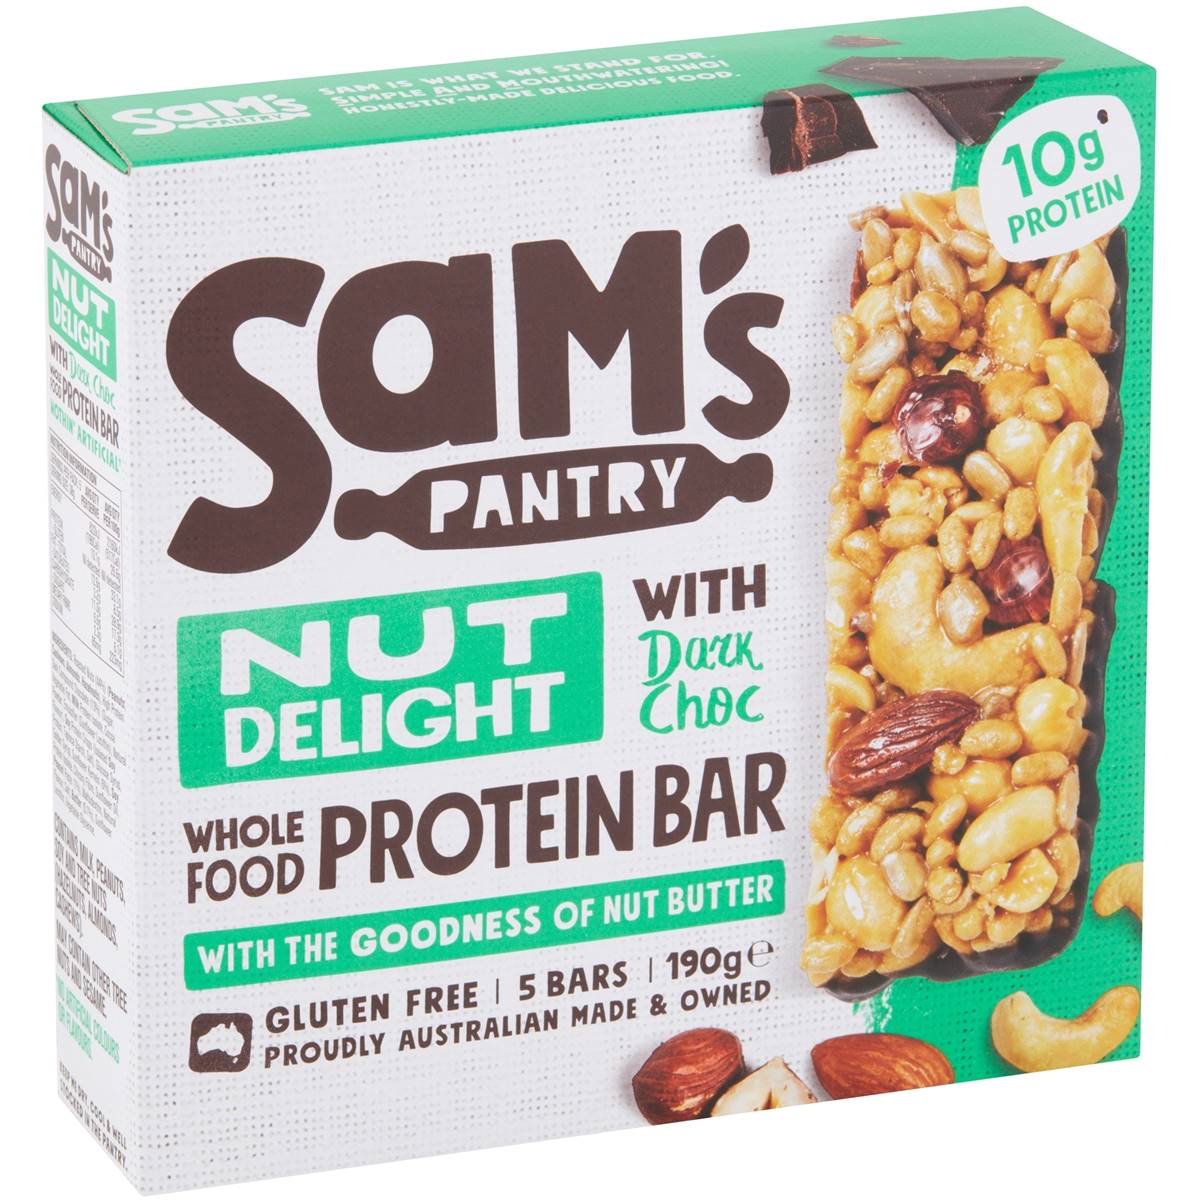 Calories in Sam's Pantry Nut Delight Protein Bar